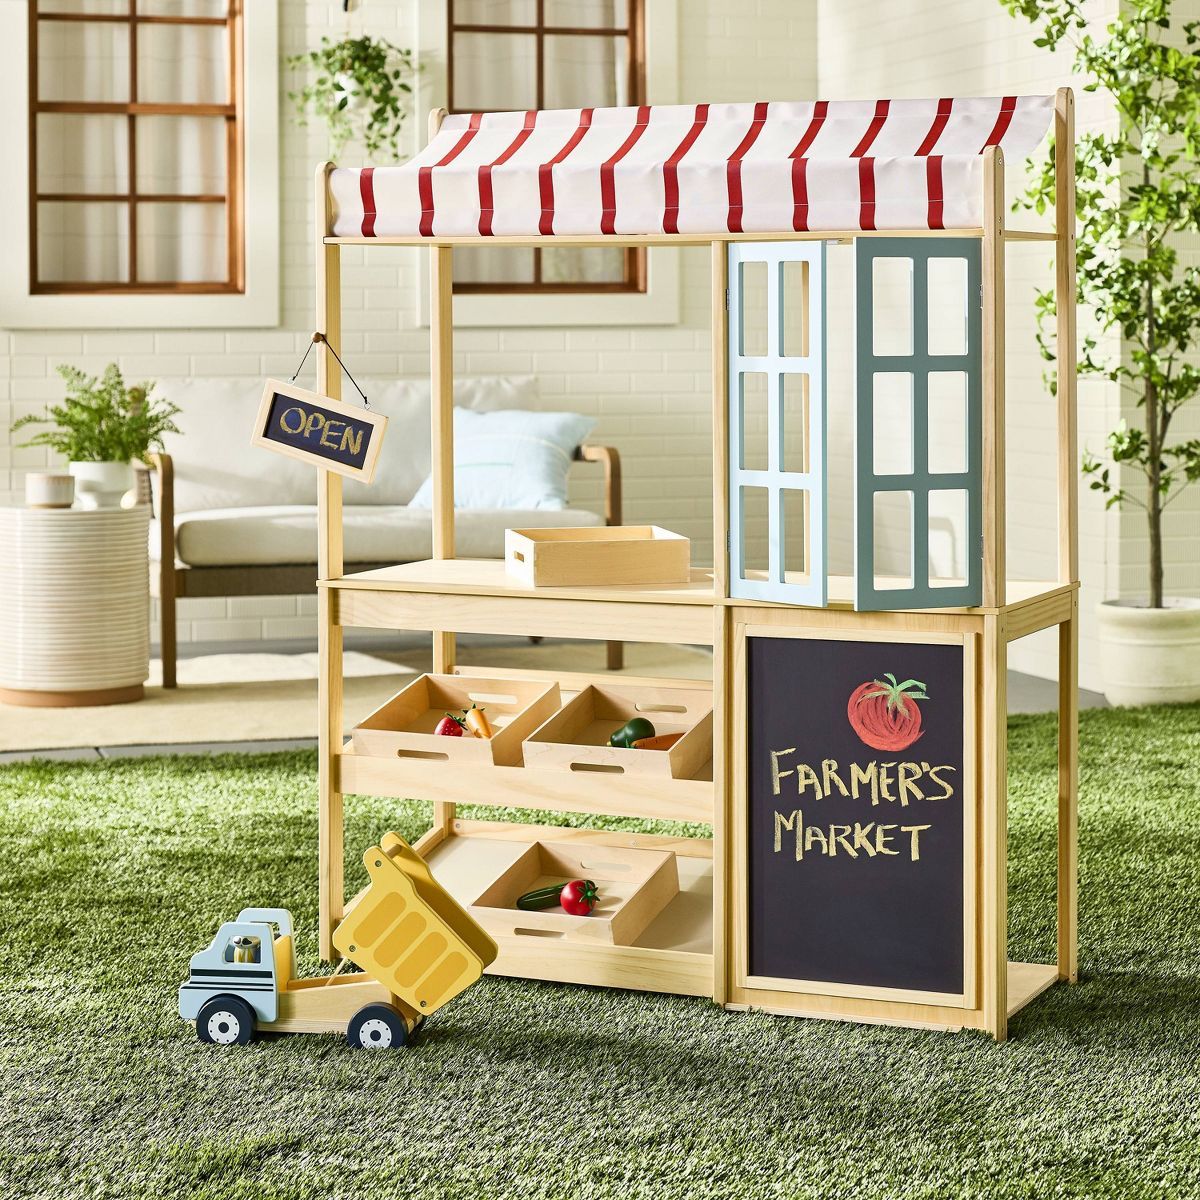 Toy Market Stand Playset - 12pc - Hearth & Hand™ with Magnolia | Target